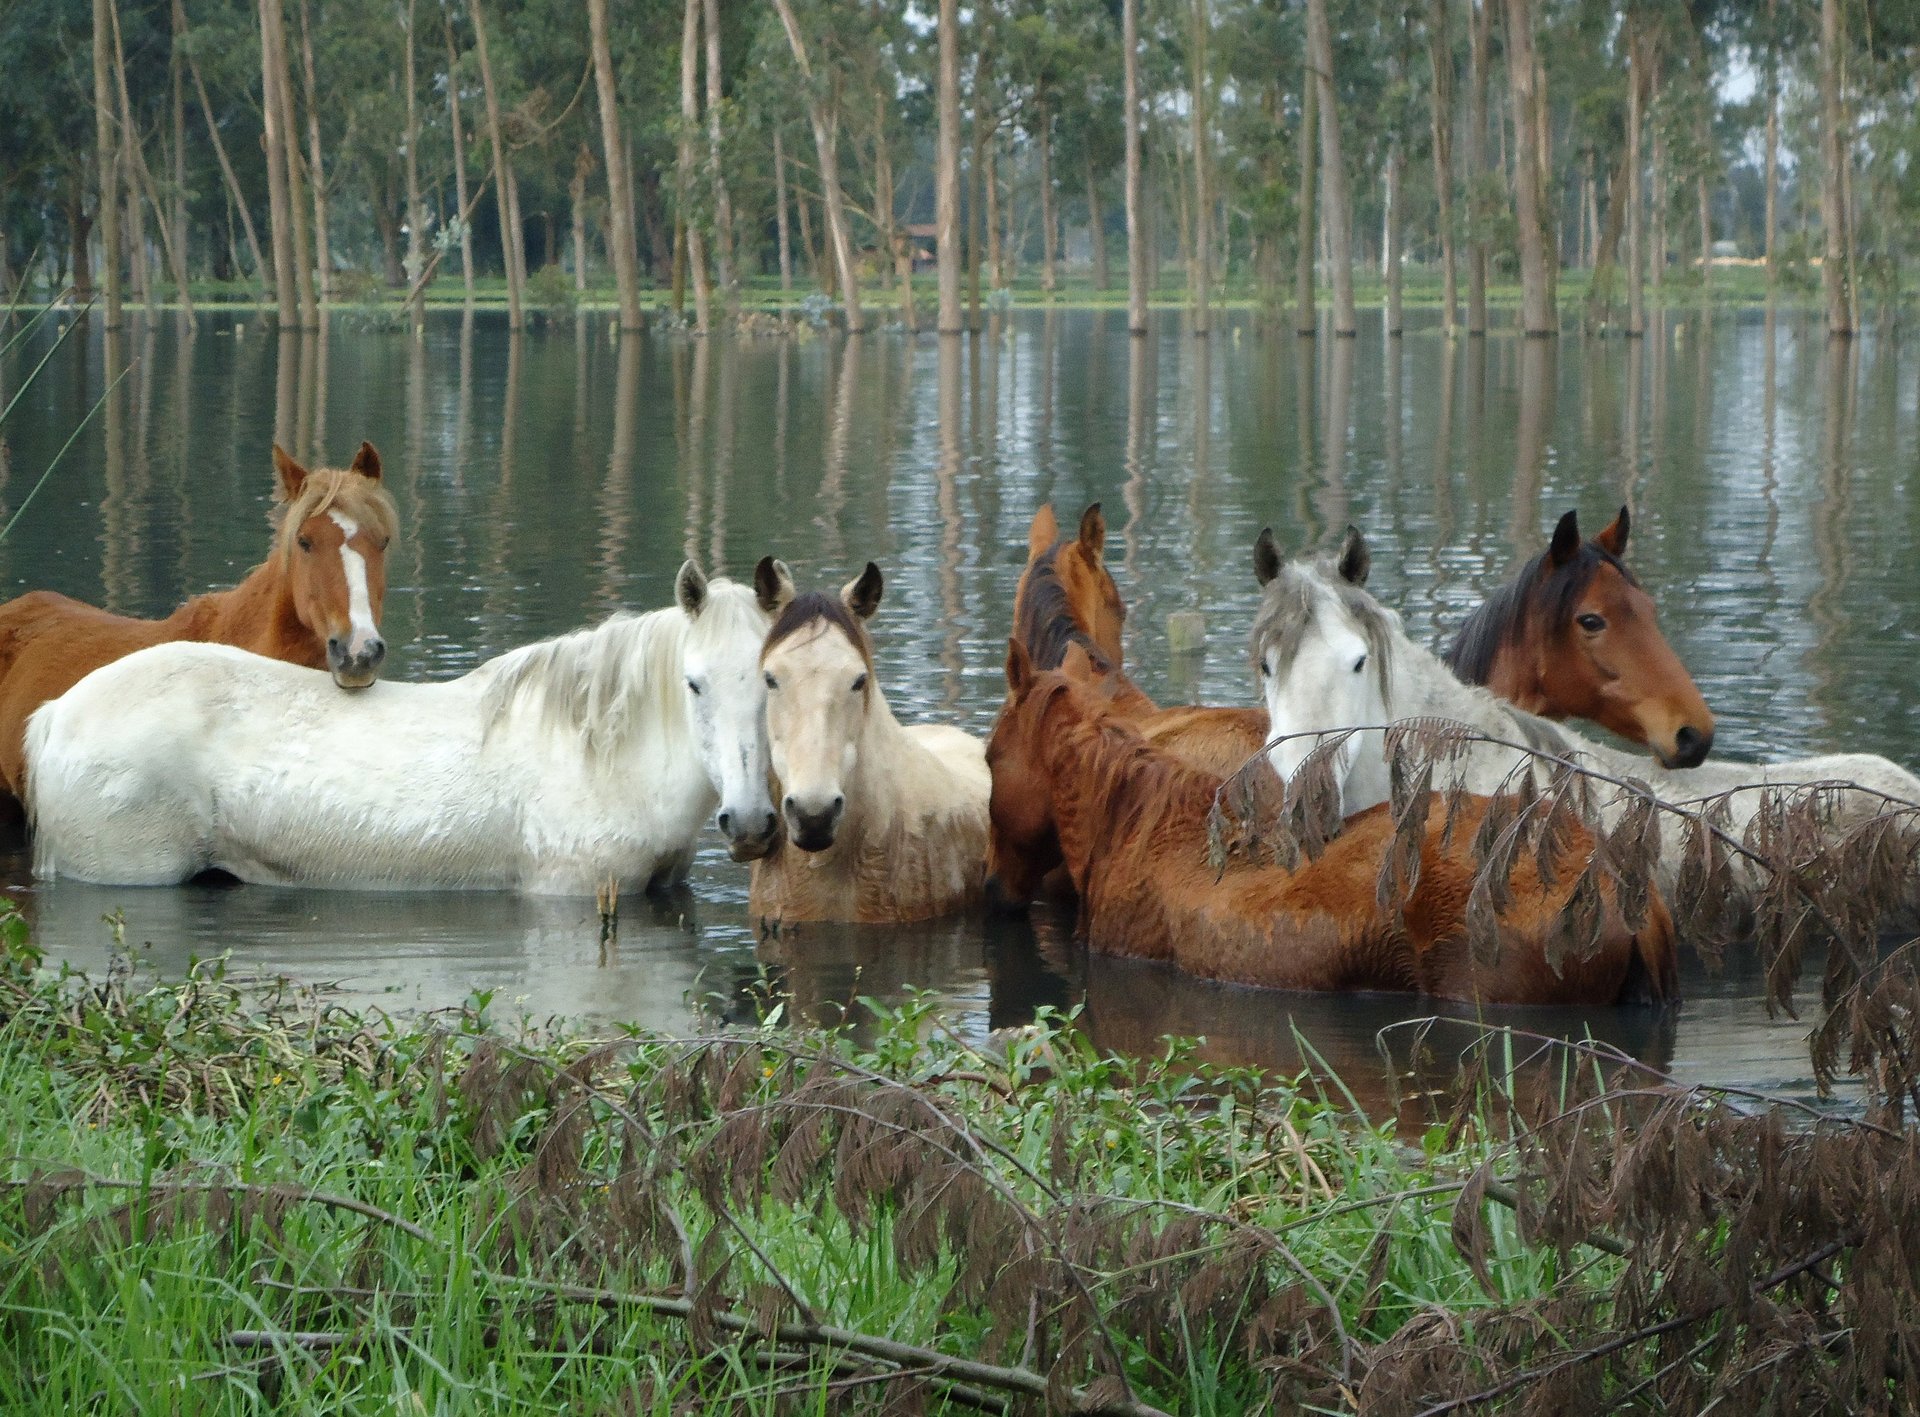 Horses left behind after flooding in Colombia before being rescued